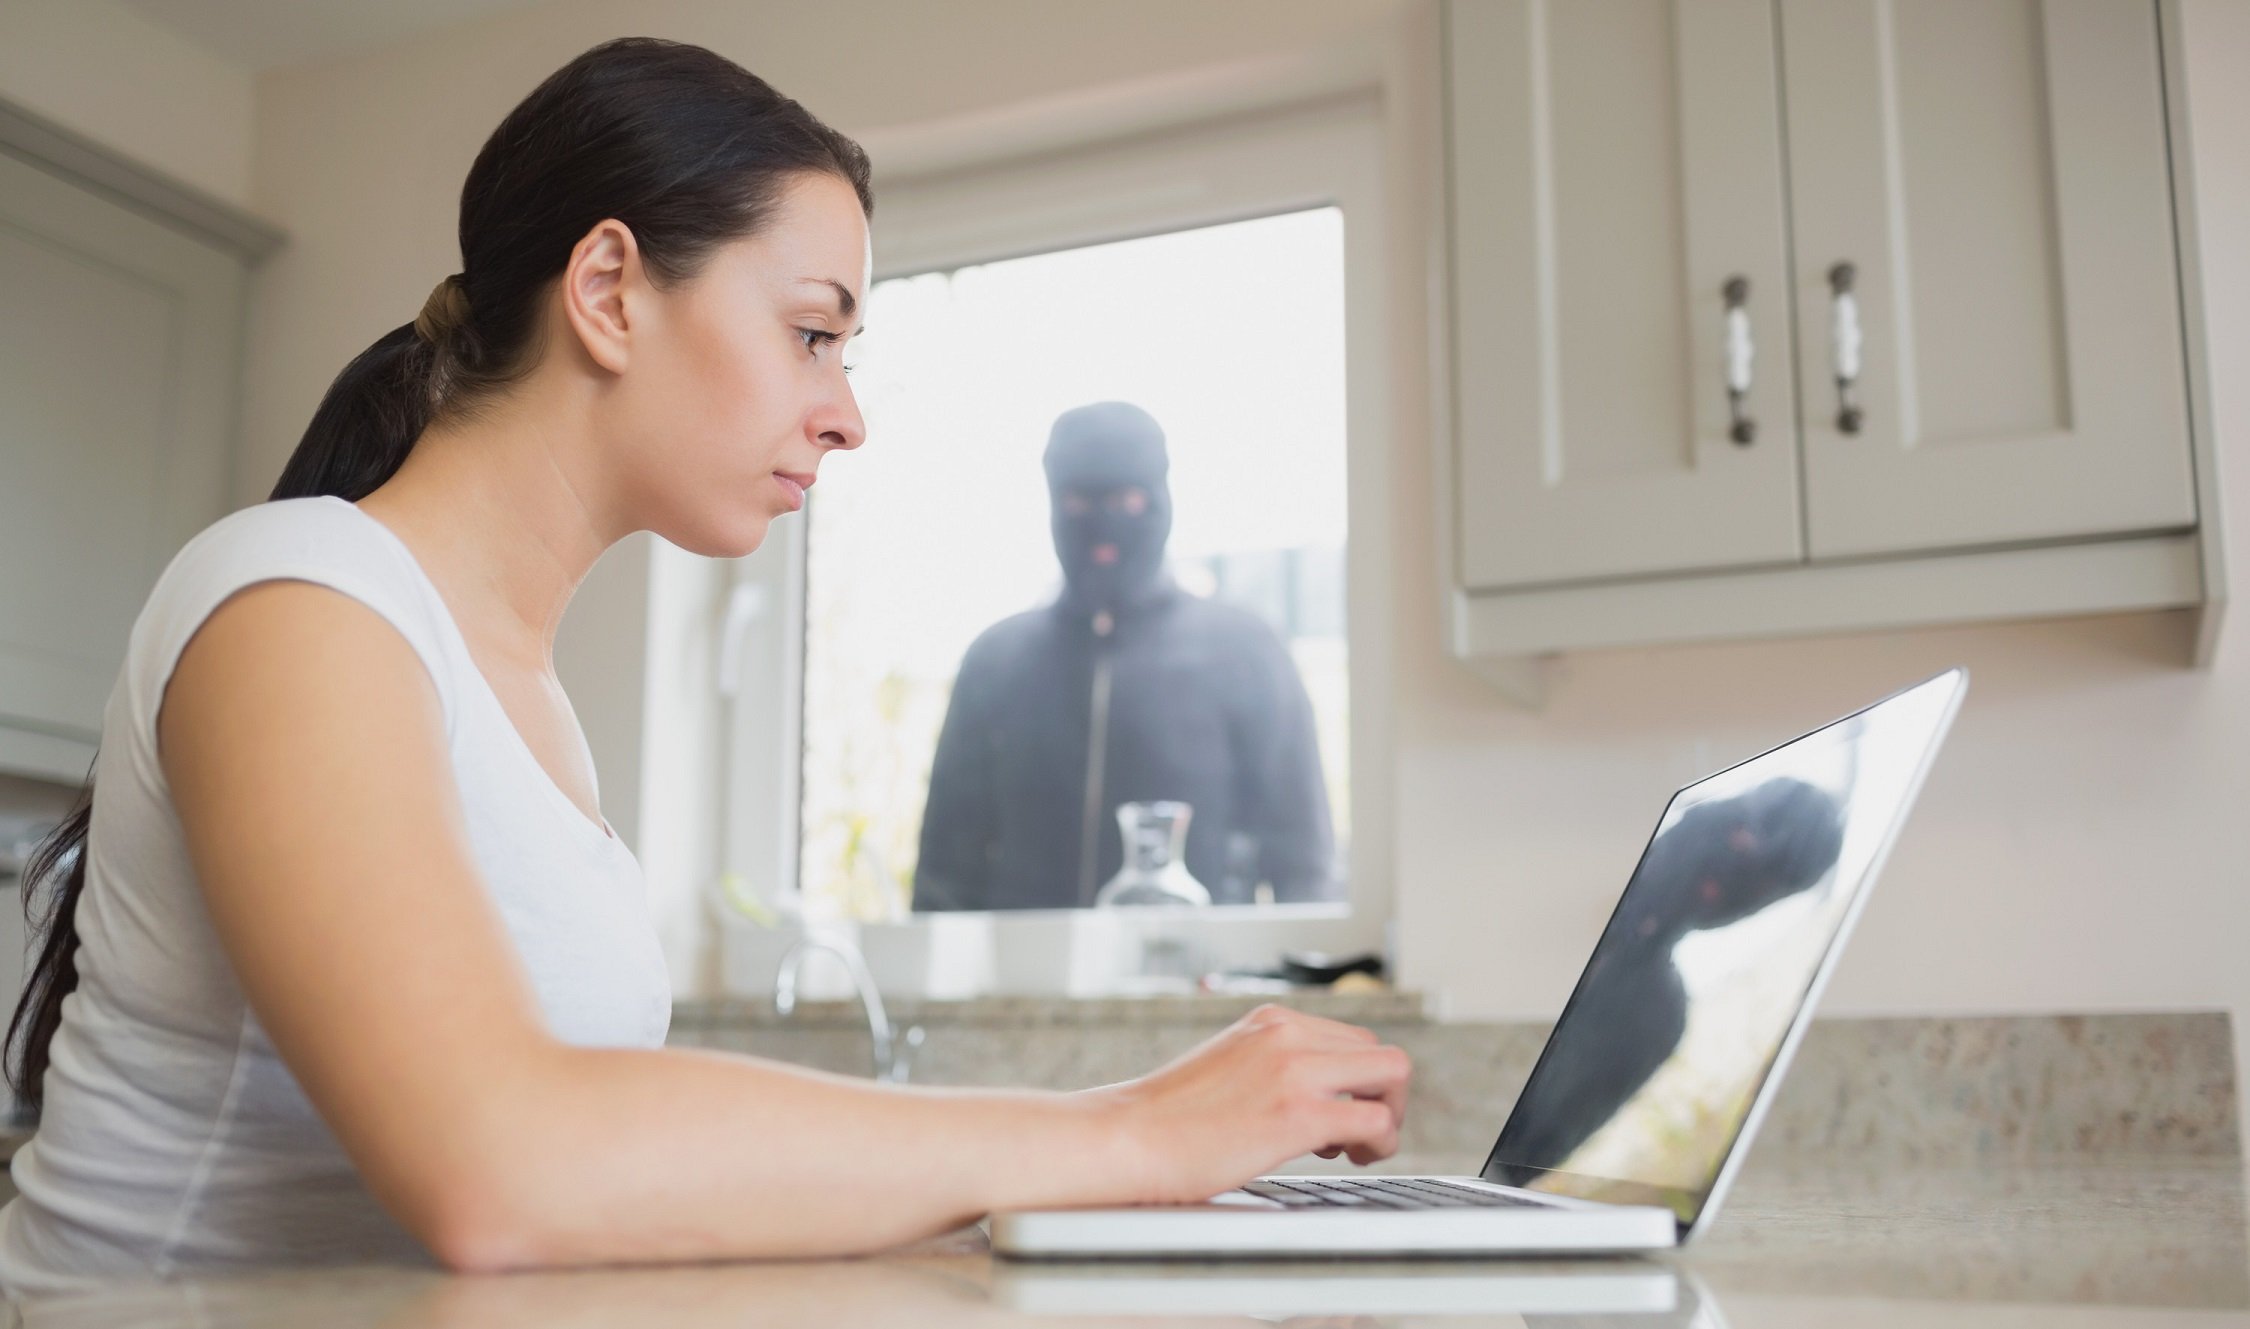 Protect yourself from cyberstalking